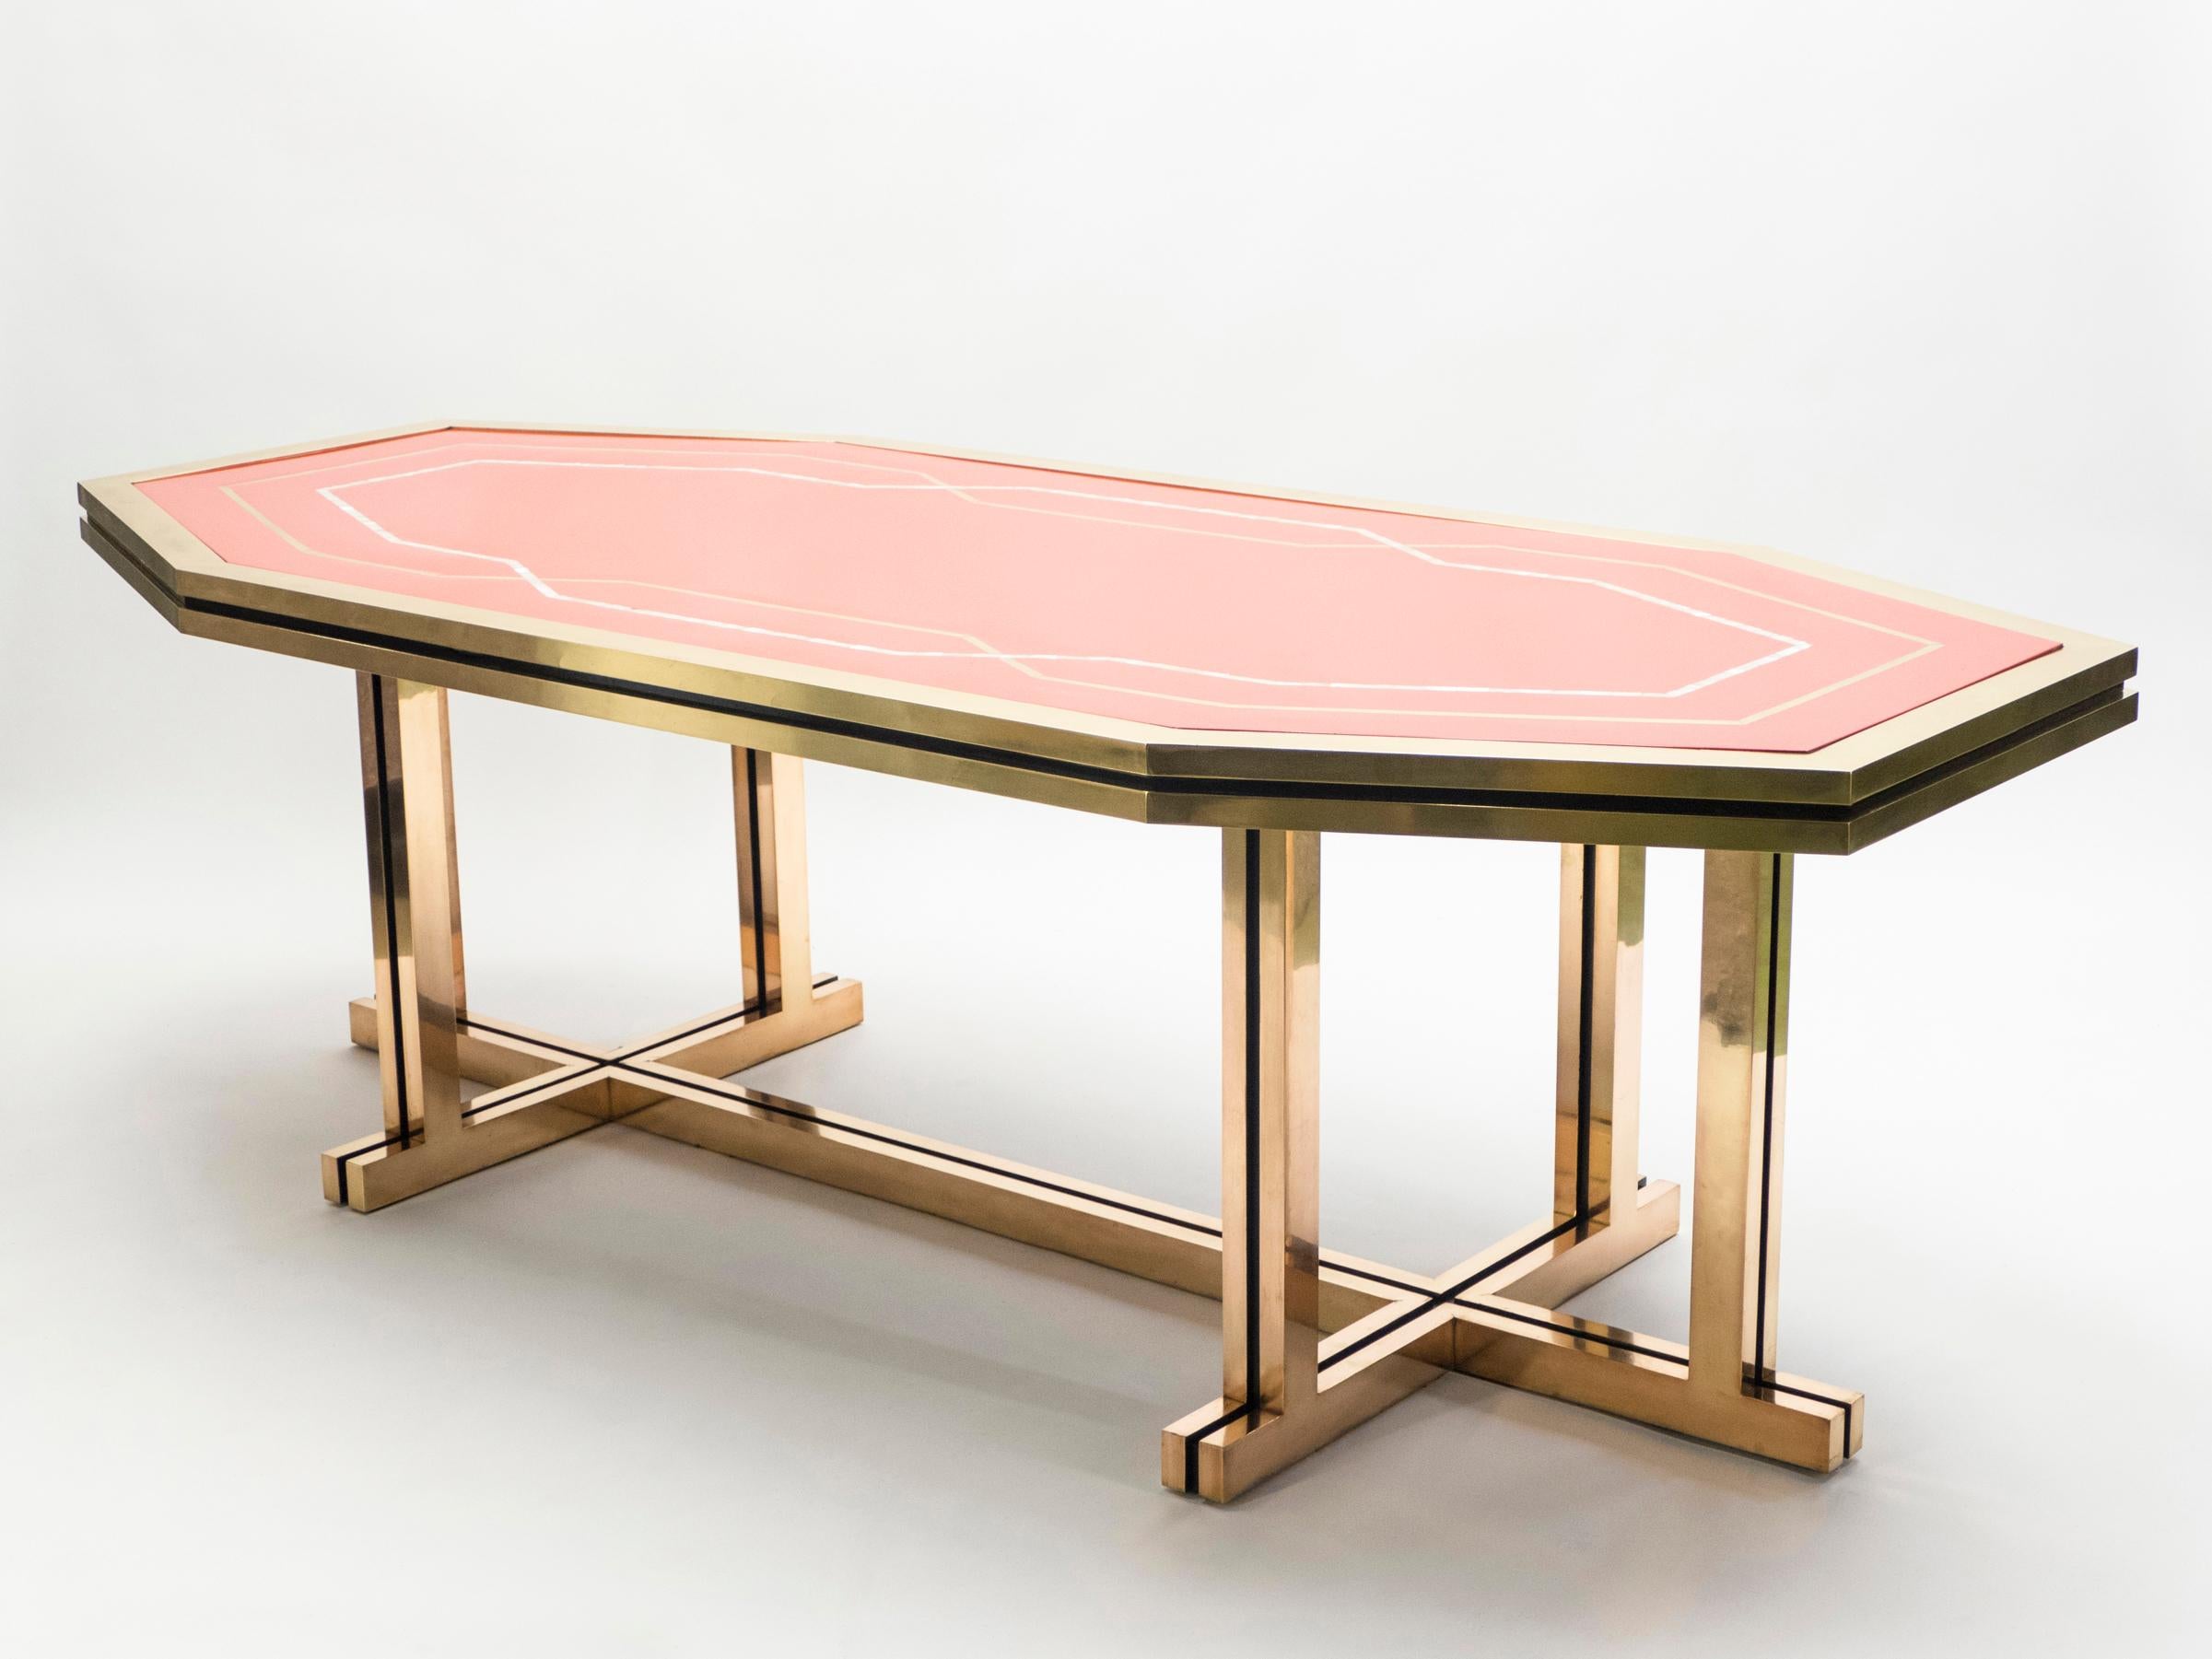 Unique Red Lacquer and Brass Maison Jansen Dining Table, 1970s (Messing)